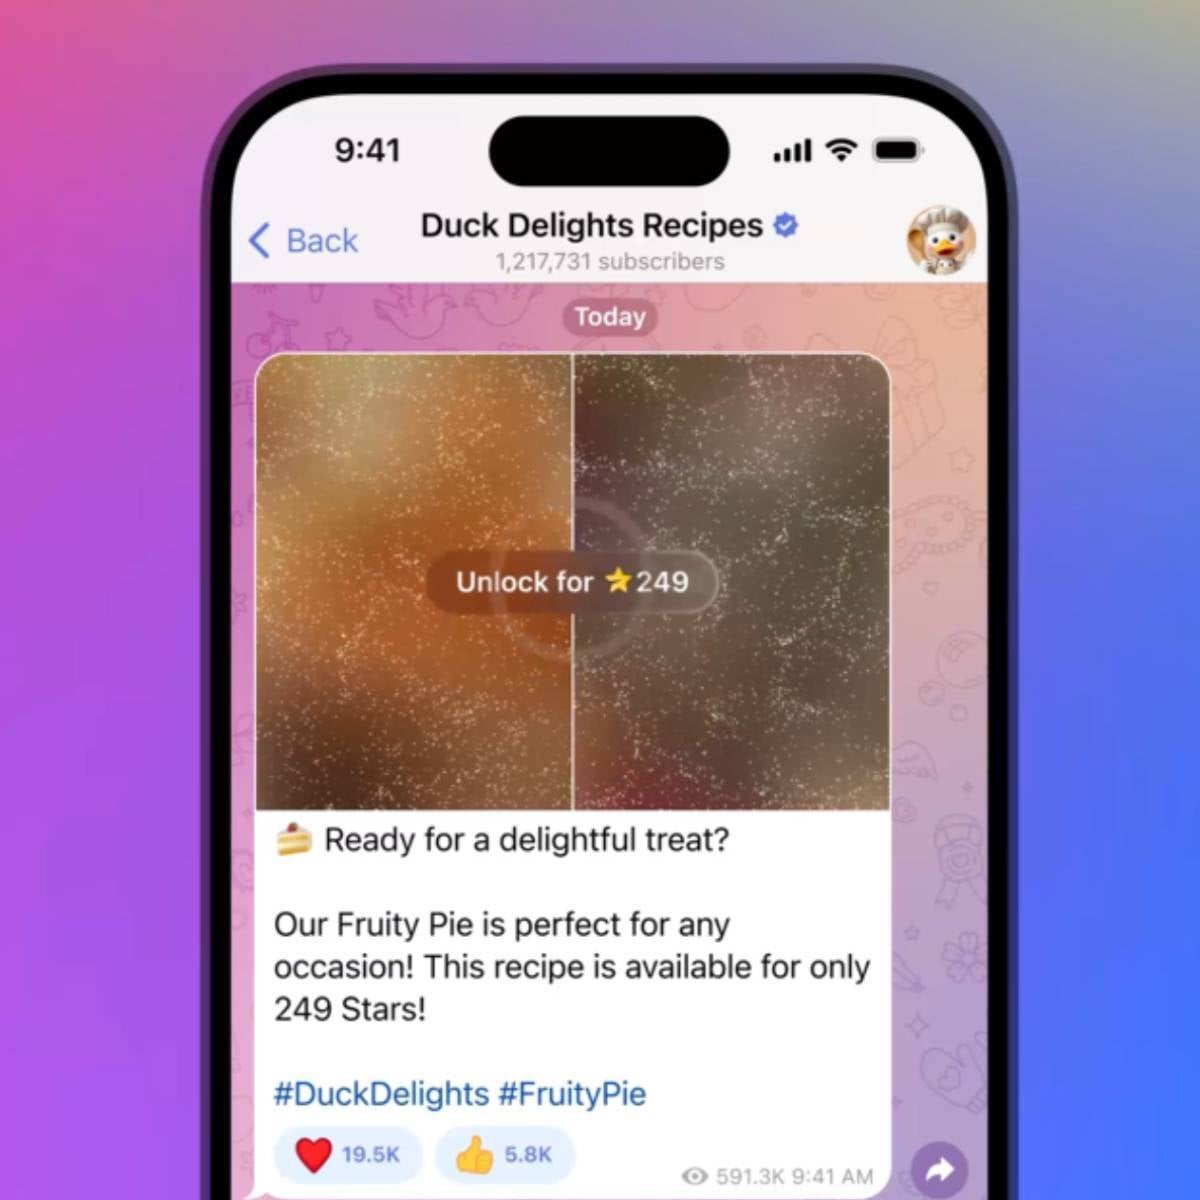 Image credit - Telegram - Telegram enters July with &quot;Search Stories by Location&quot; and seven other new features